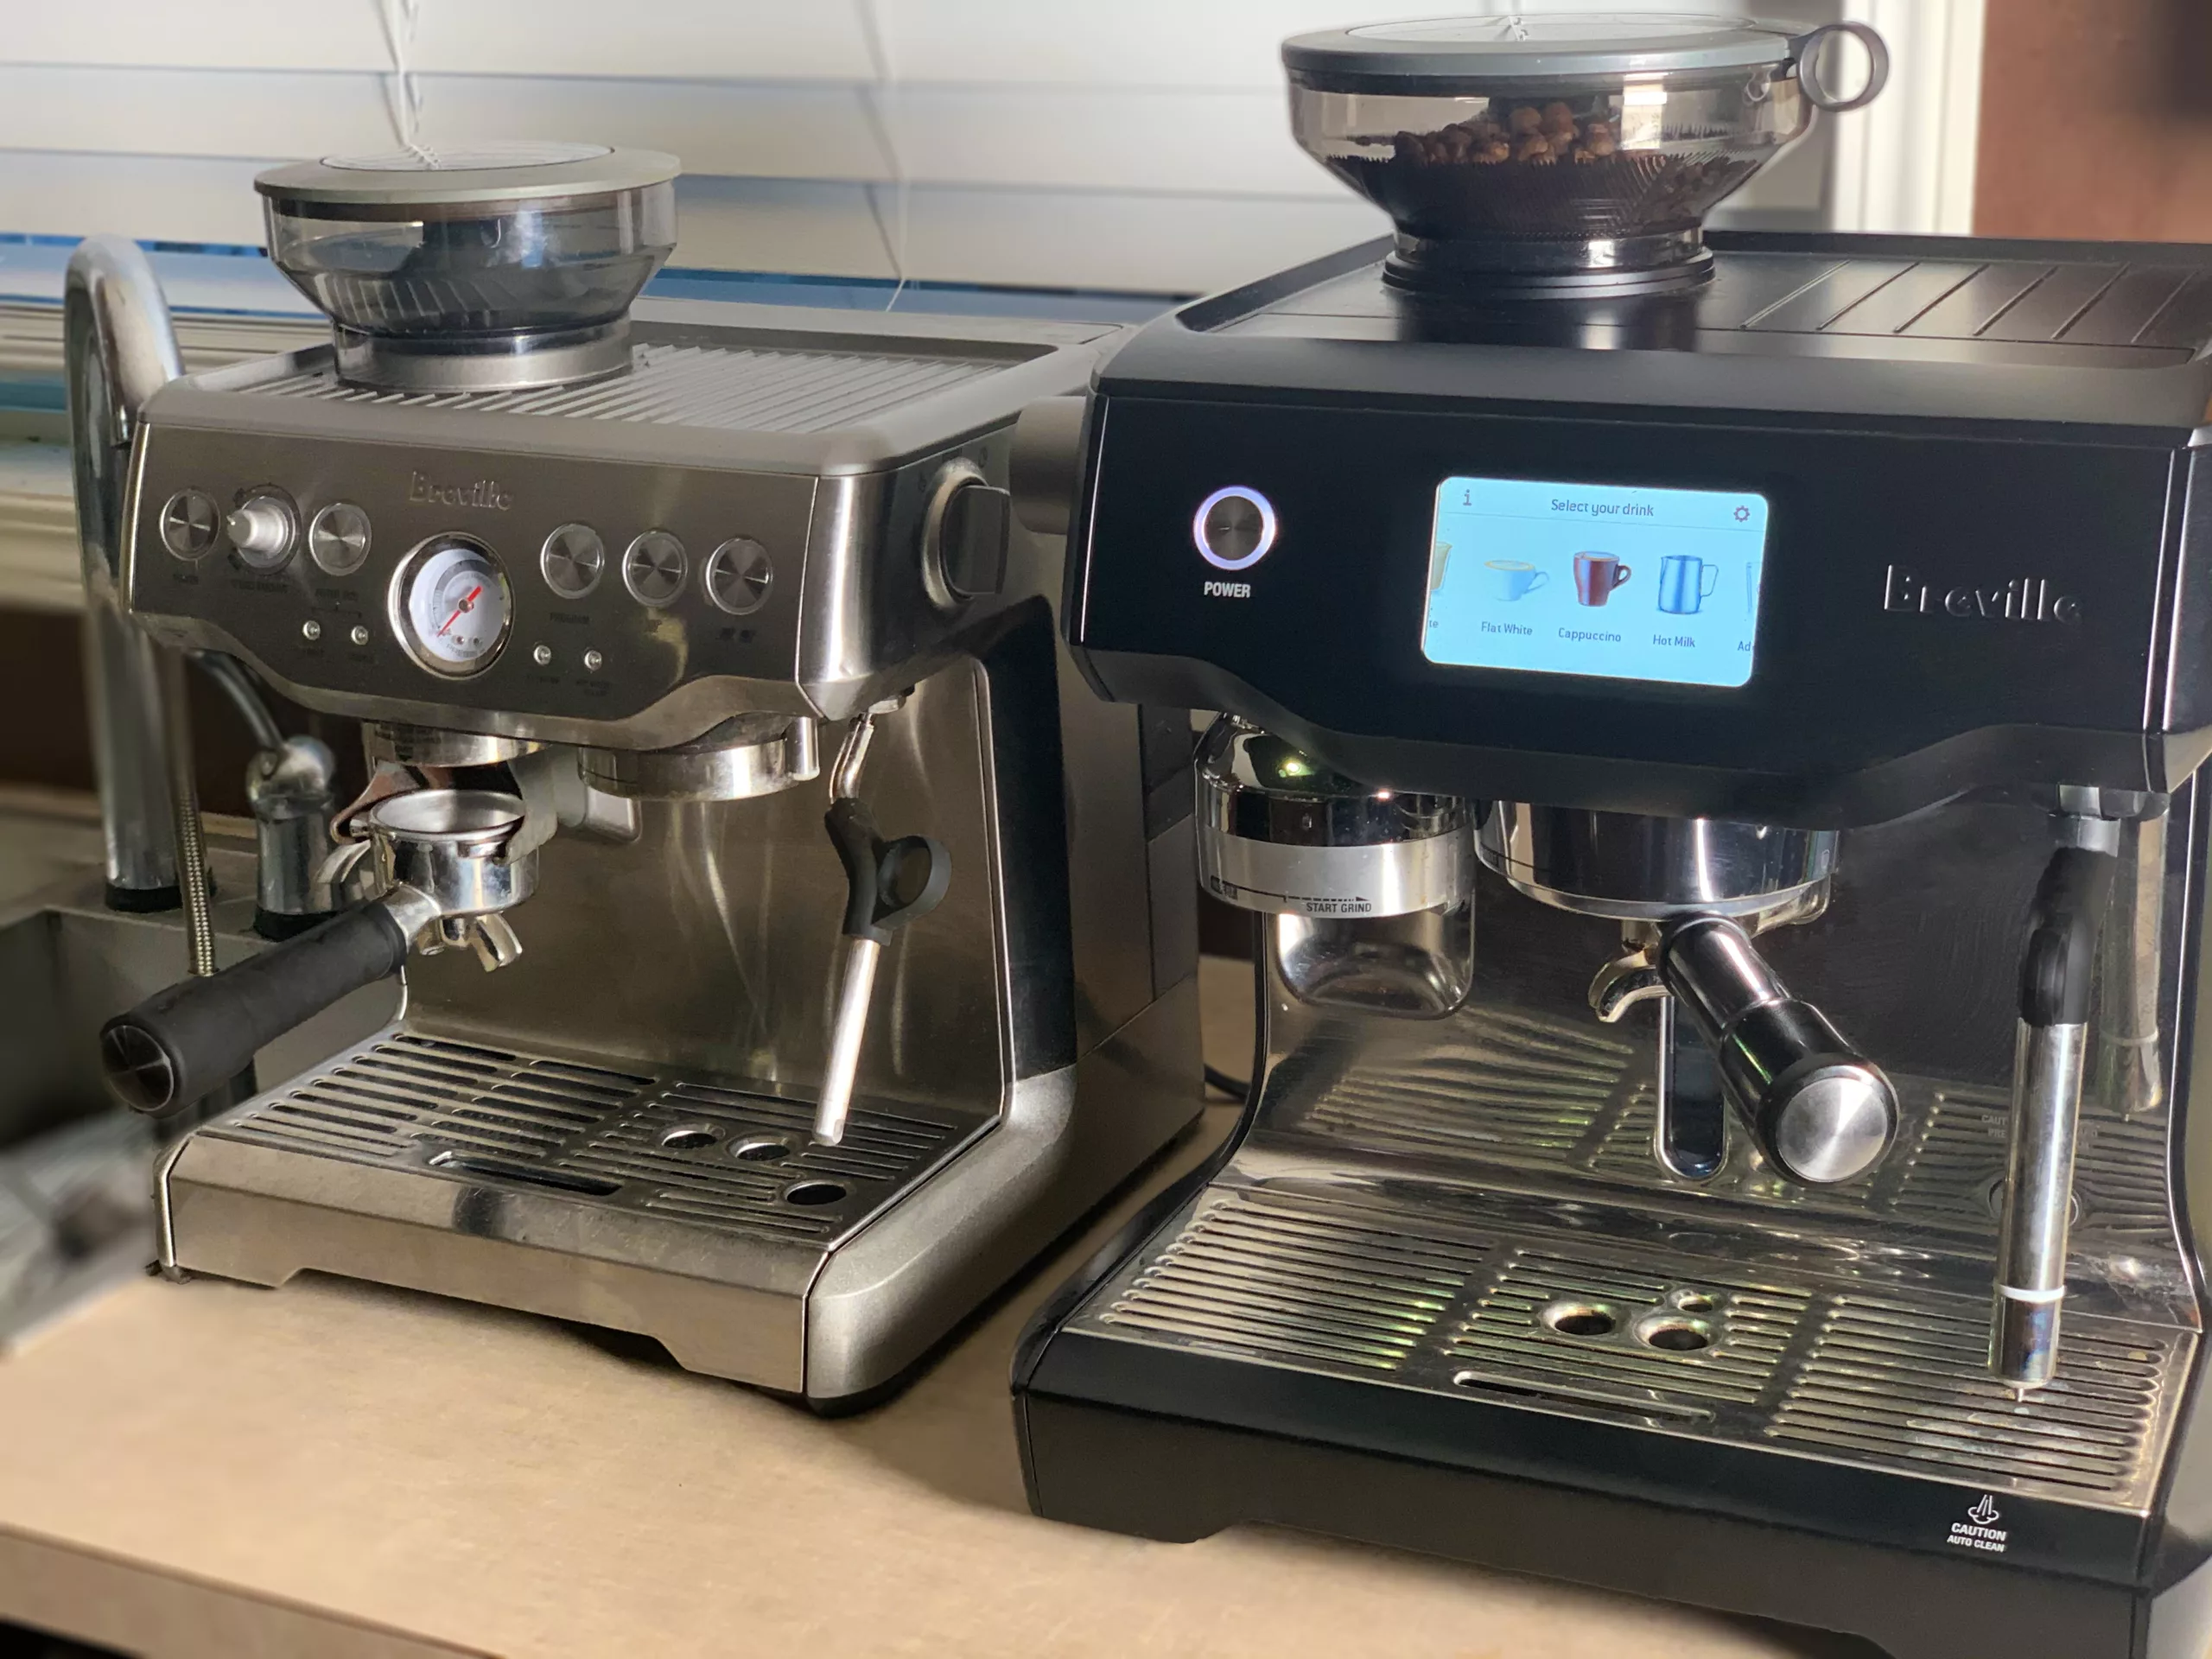 https://www.sizzleandsear.com/wp-content/uploads/2020/12/breville-oracle-touch-vs-breville-barista-express-scaled.webp